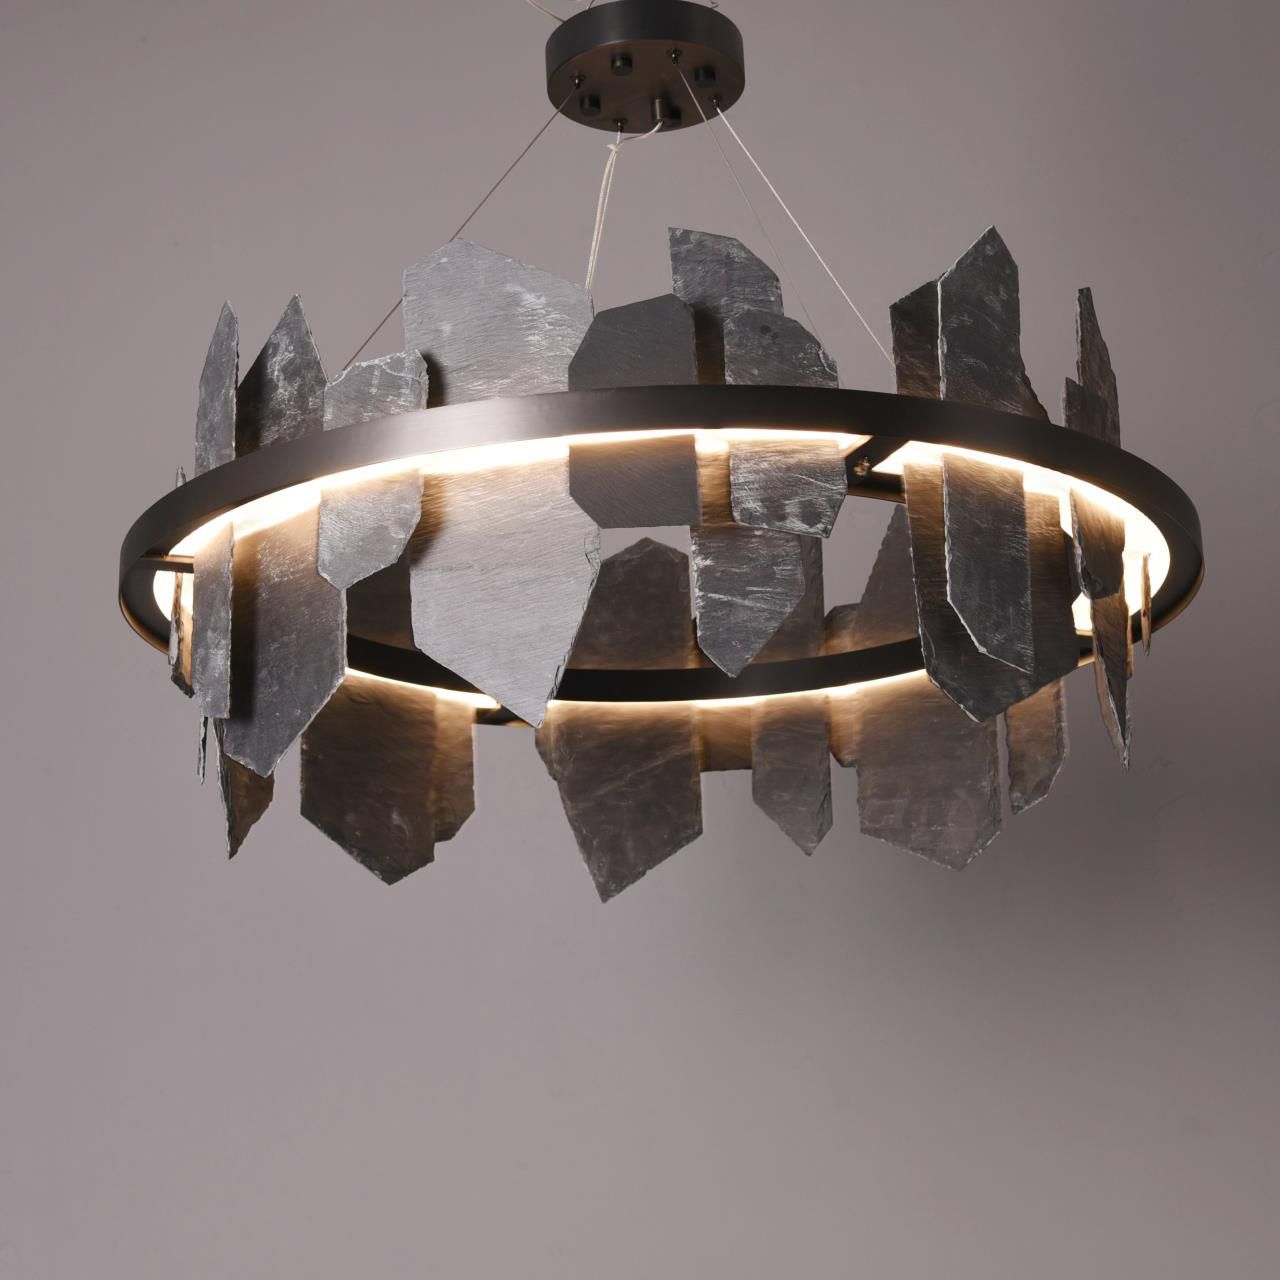 40"W Round Slate Natural Stone LED Industrial Chandelier - Italian Concept - 